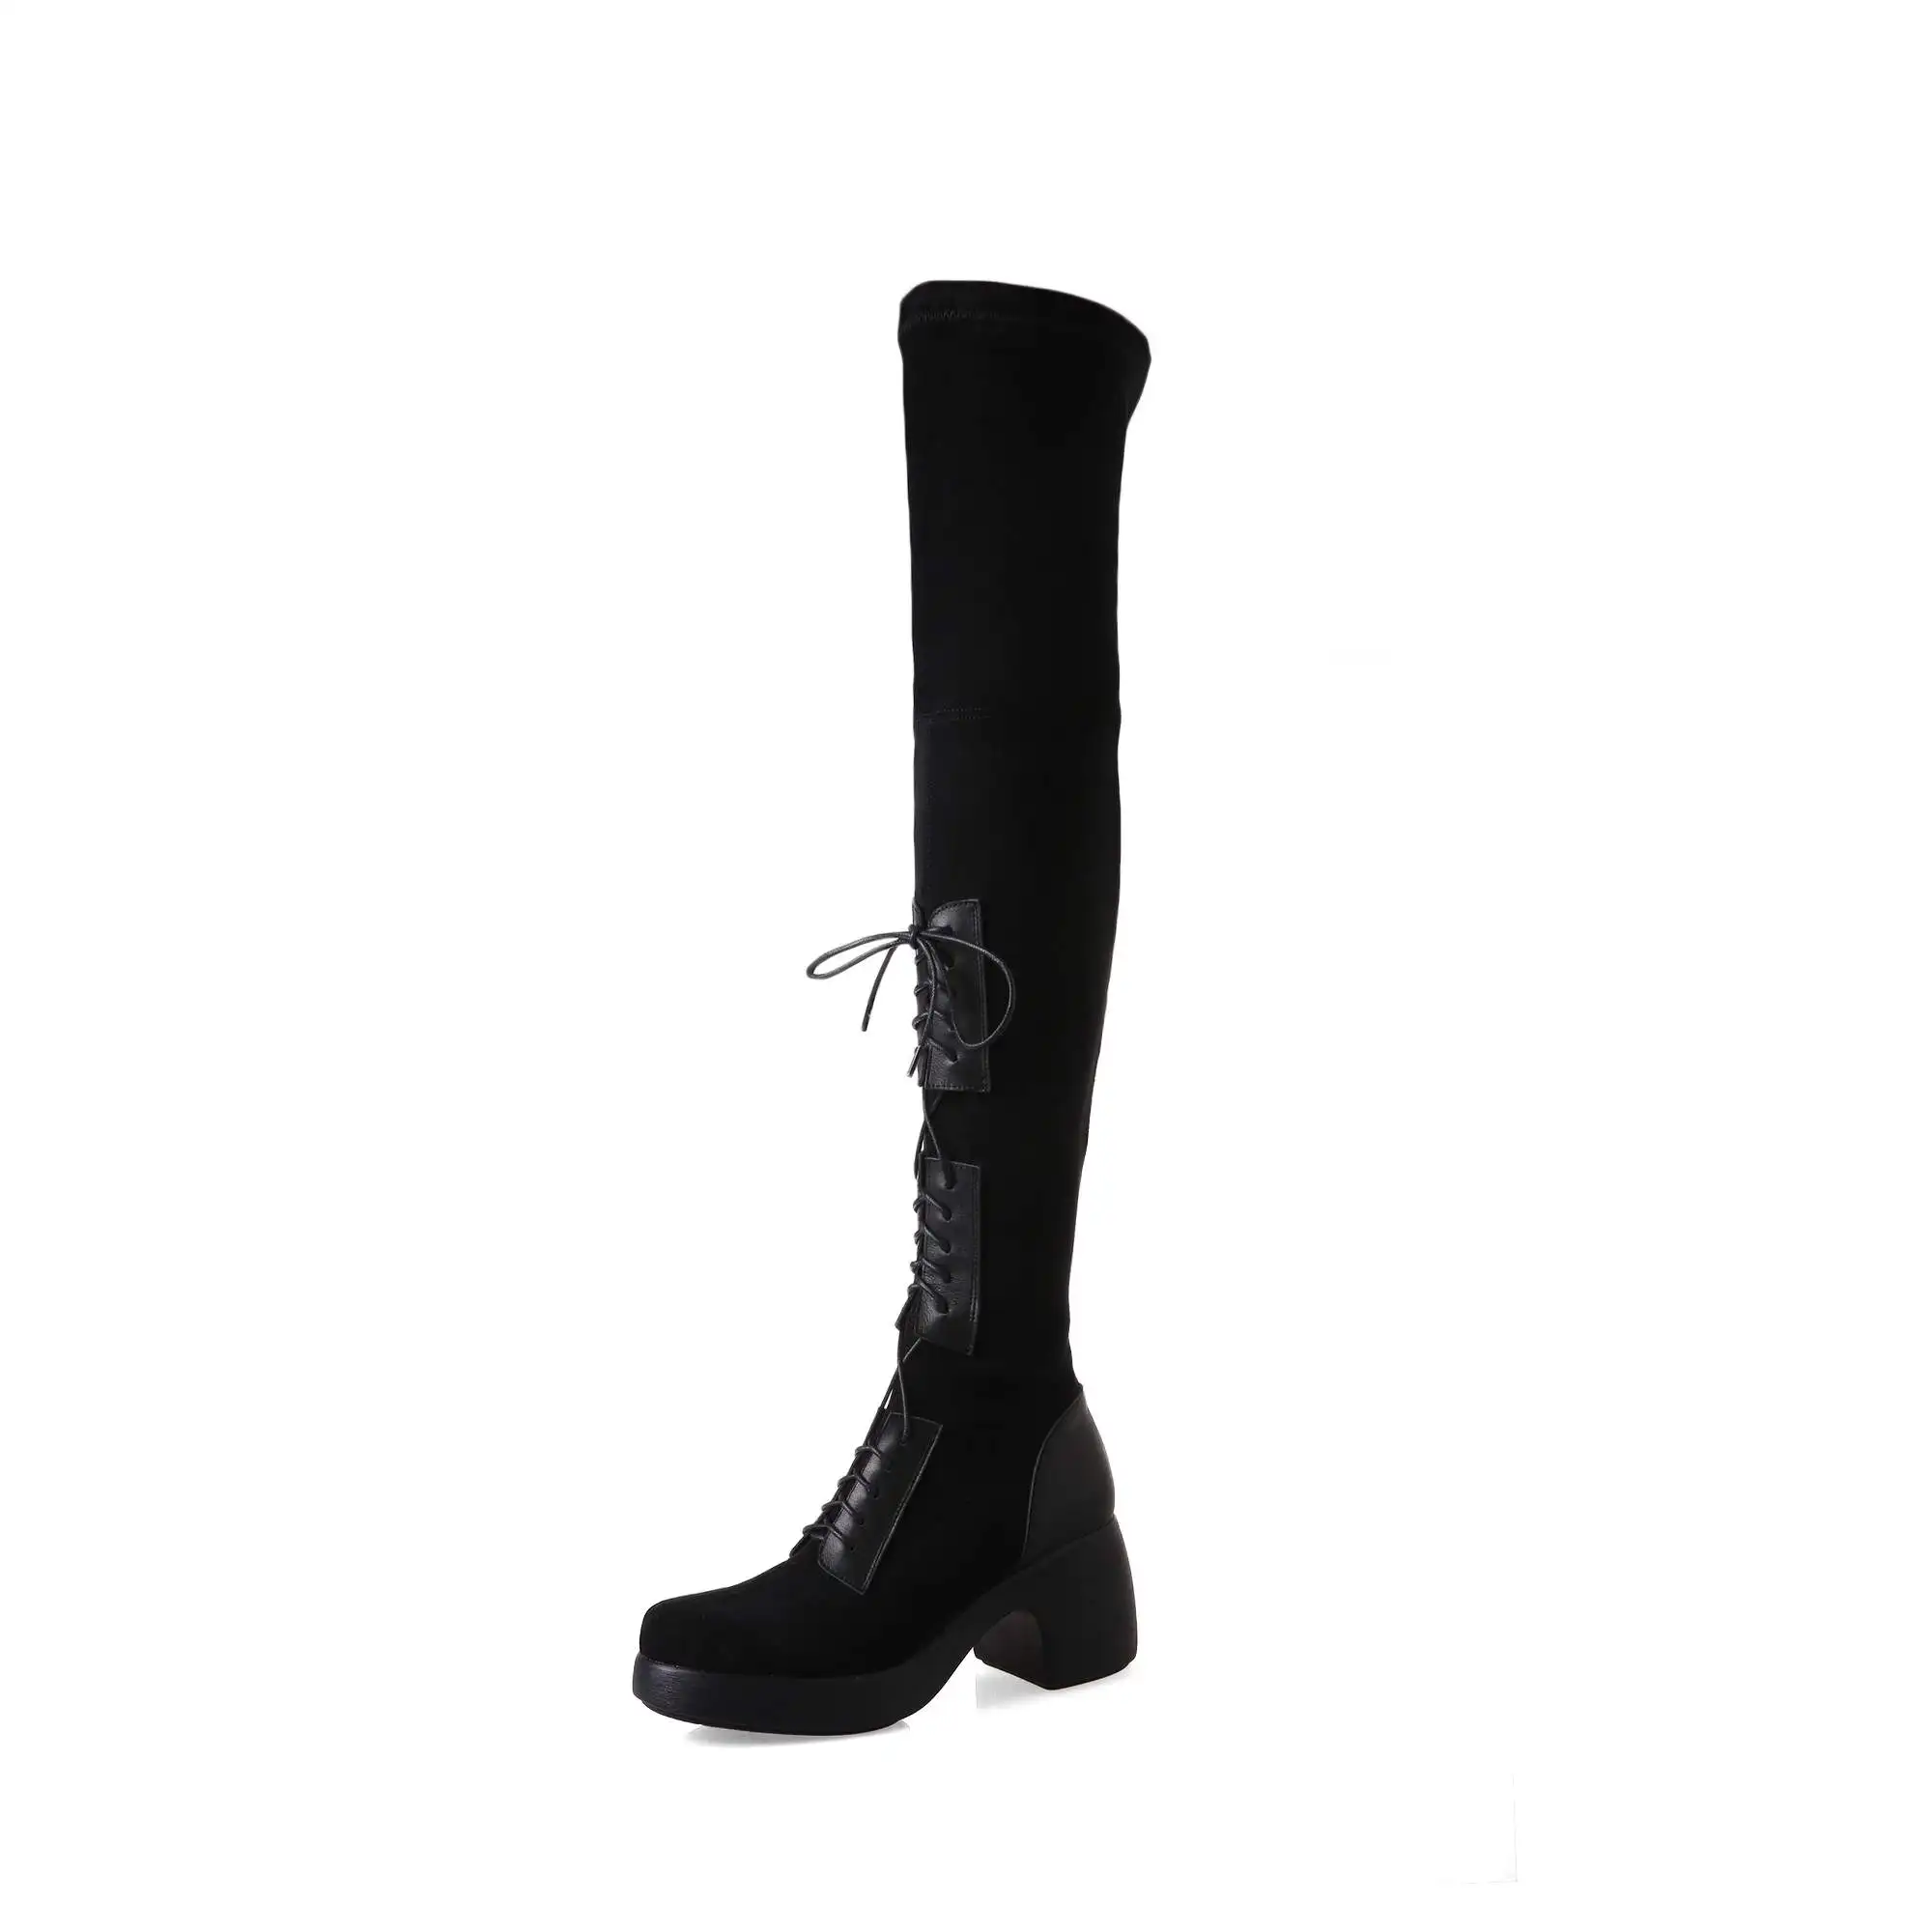 

krazing pot high street fashion riding boots cow leather round toe rock singer high heels stretch flock over the knee boots L32